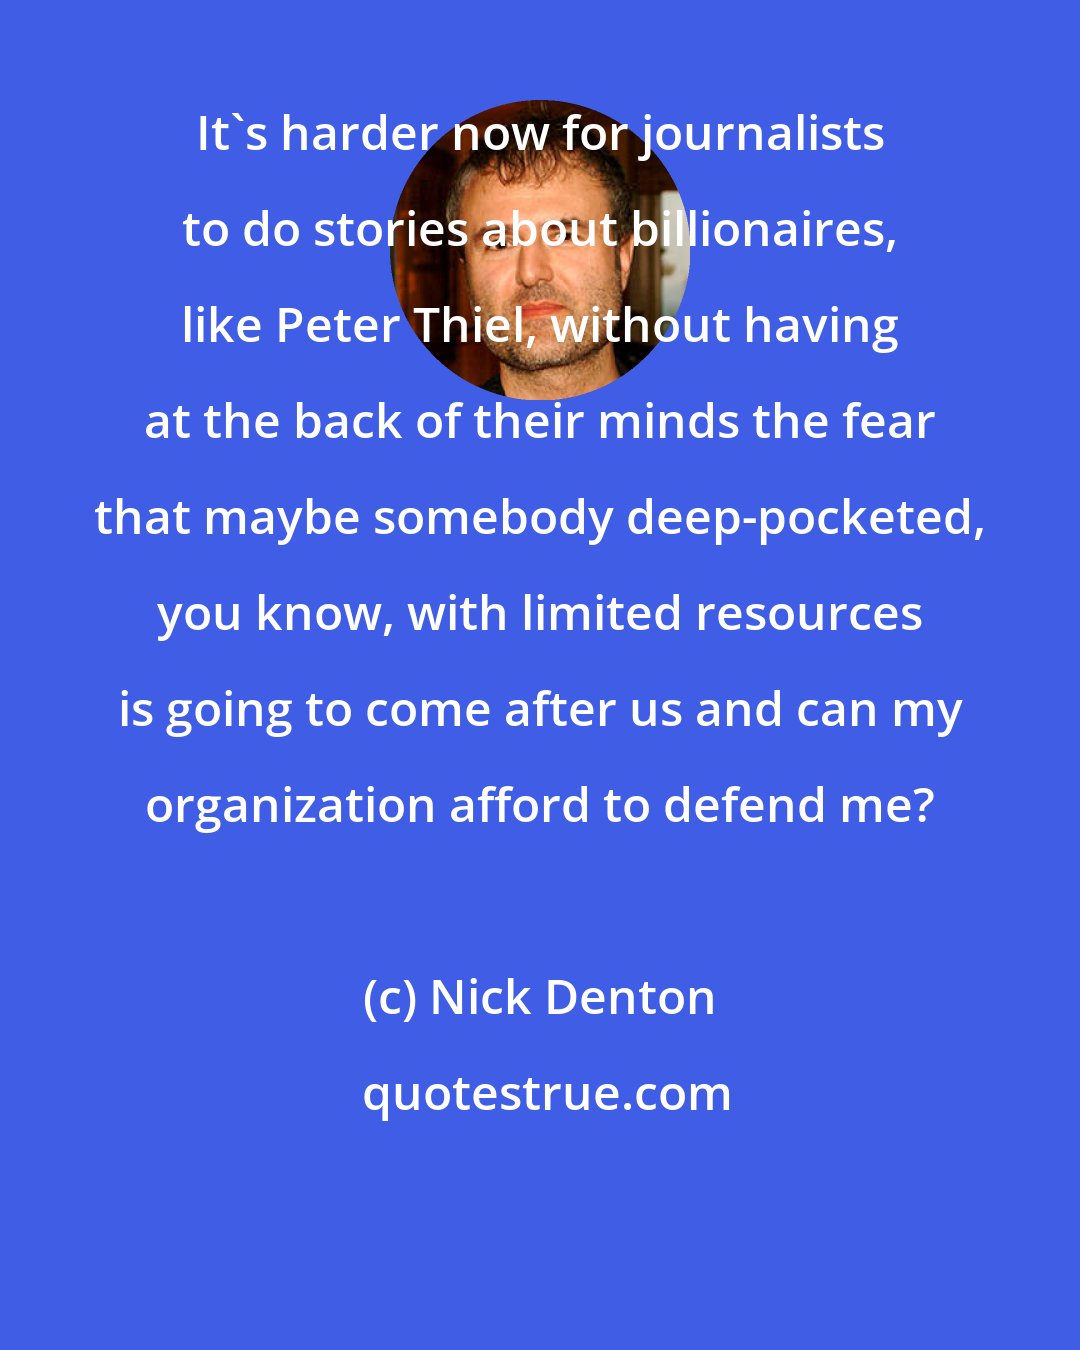 Nick Denton: It's harder now for journalists to do stories about billionaires, like Peter Thiel, without having at the back of their minds the fear that maybe somebody deep-pocketed, you know, with limited resources is going to come after us and can my organization afford to defend me?